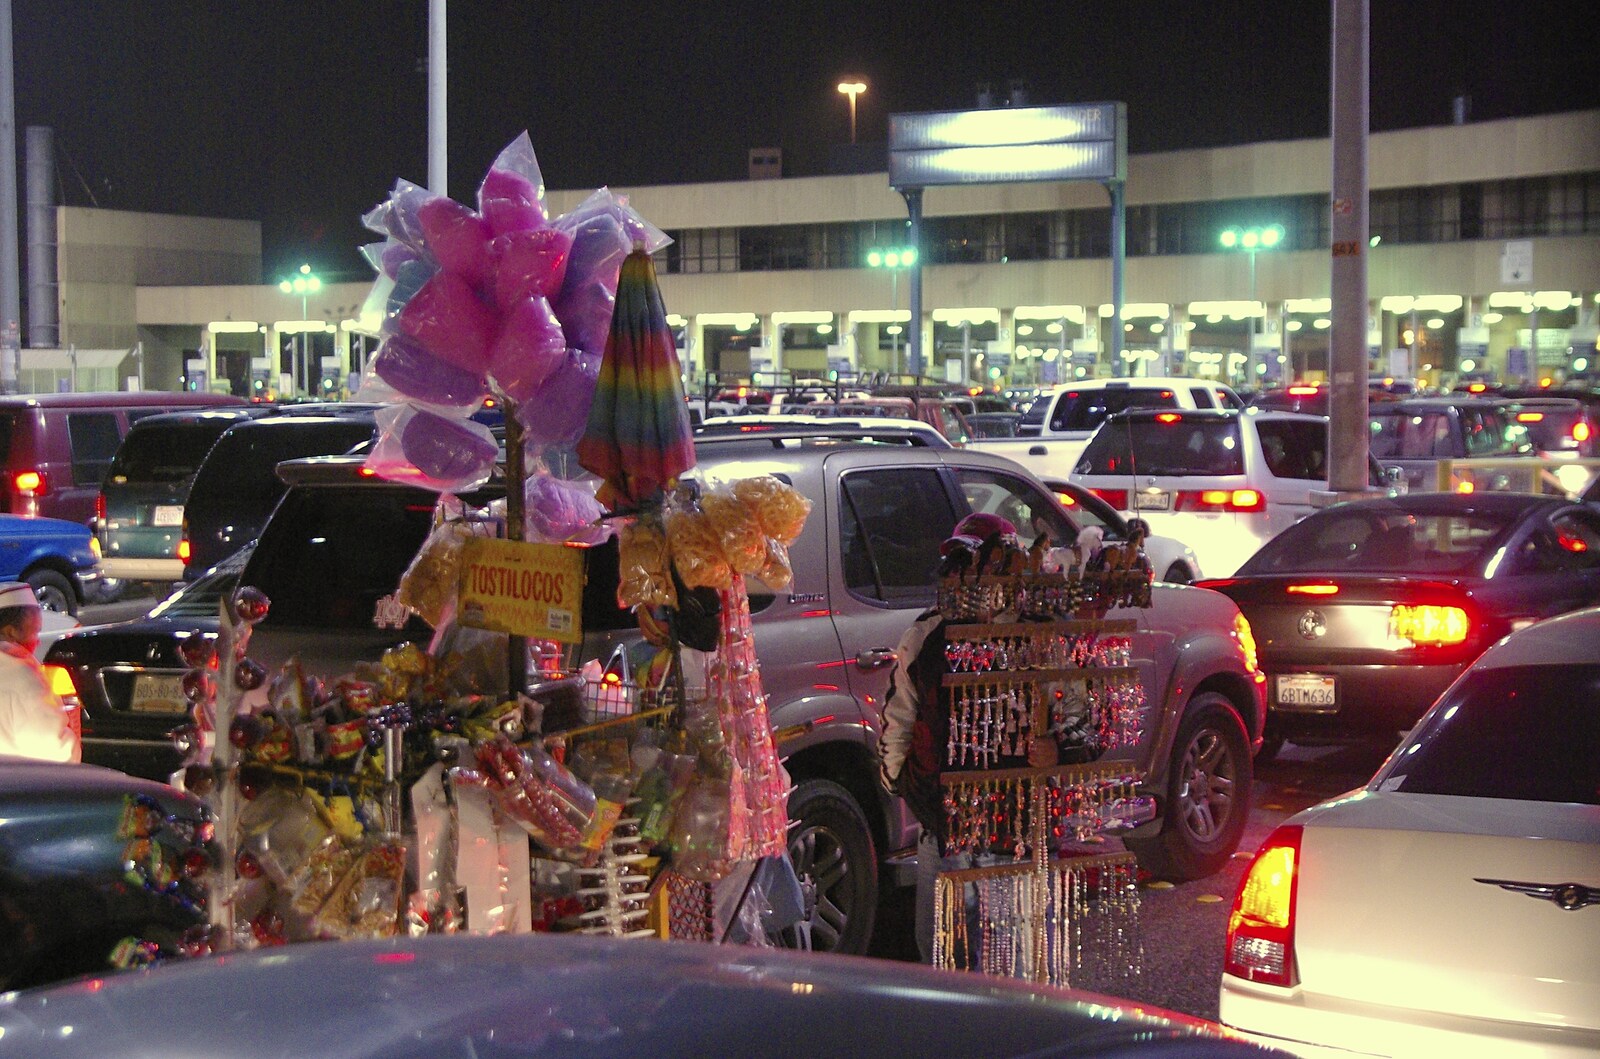 Rosarito and Tijuana, Baja California, Mexico - 2nd March 2008: Street vendors ply their wares amongst queued cars